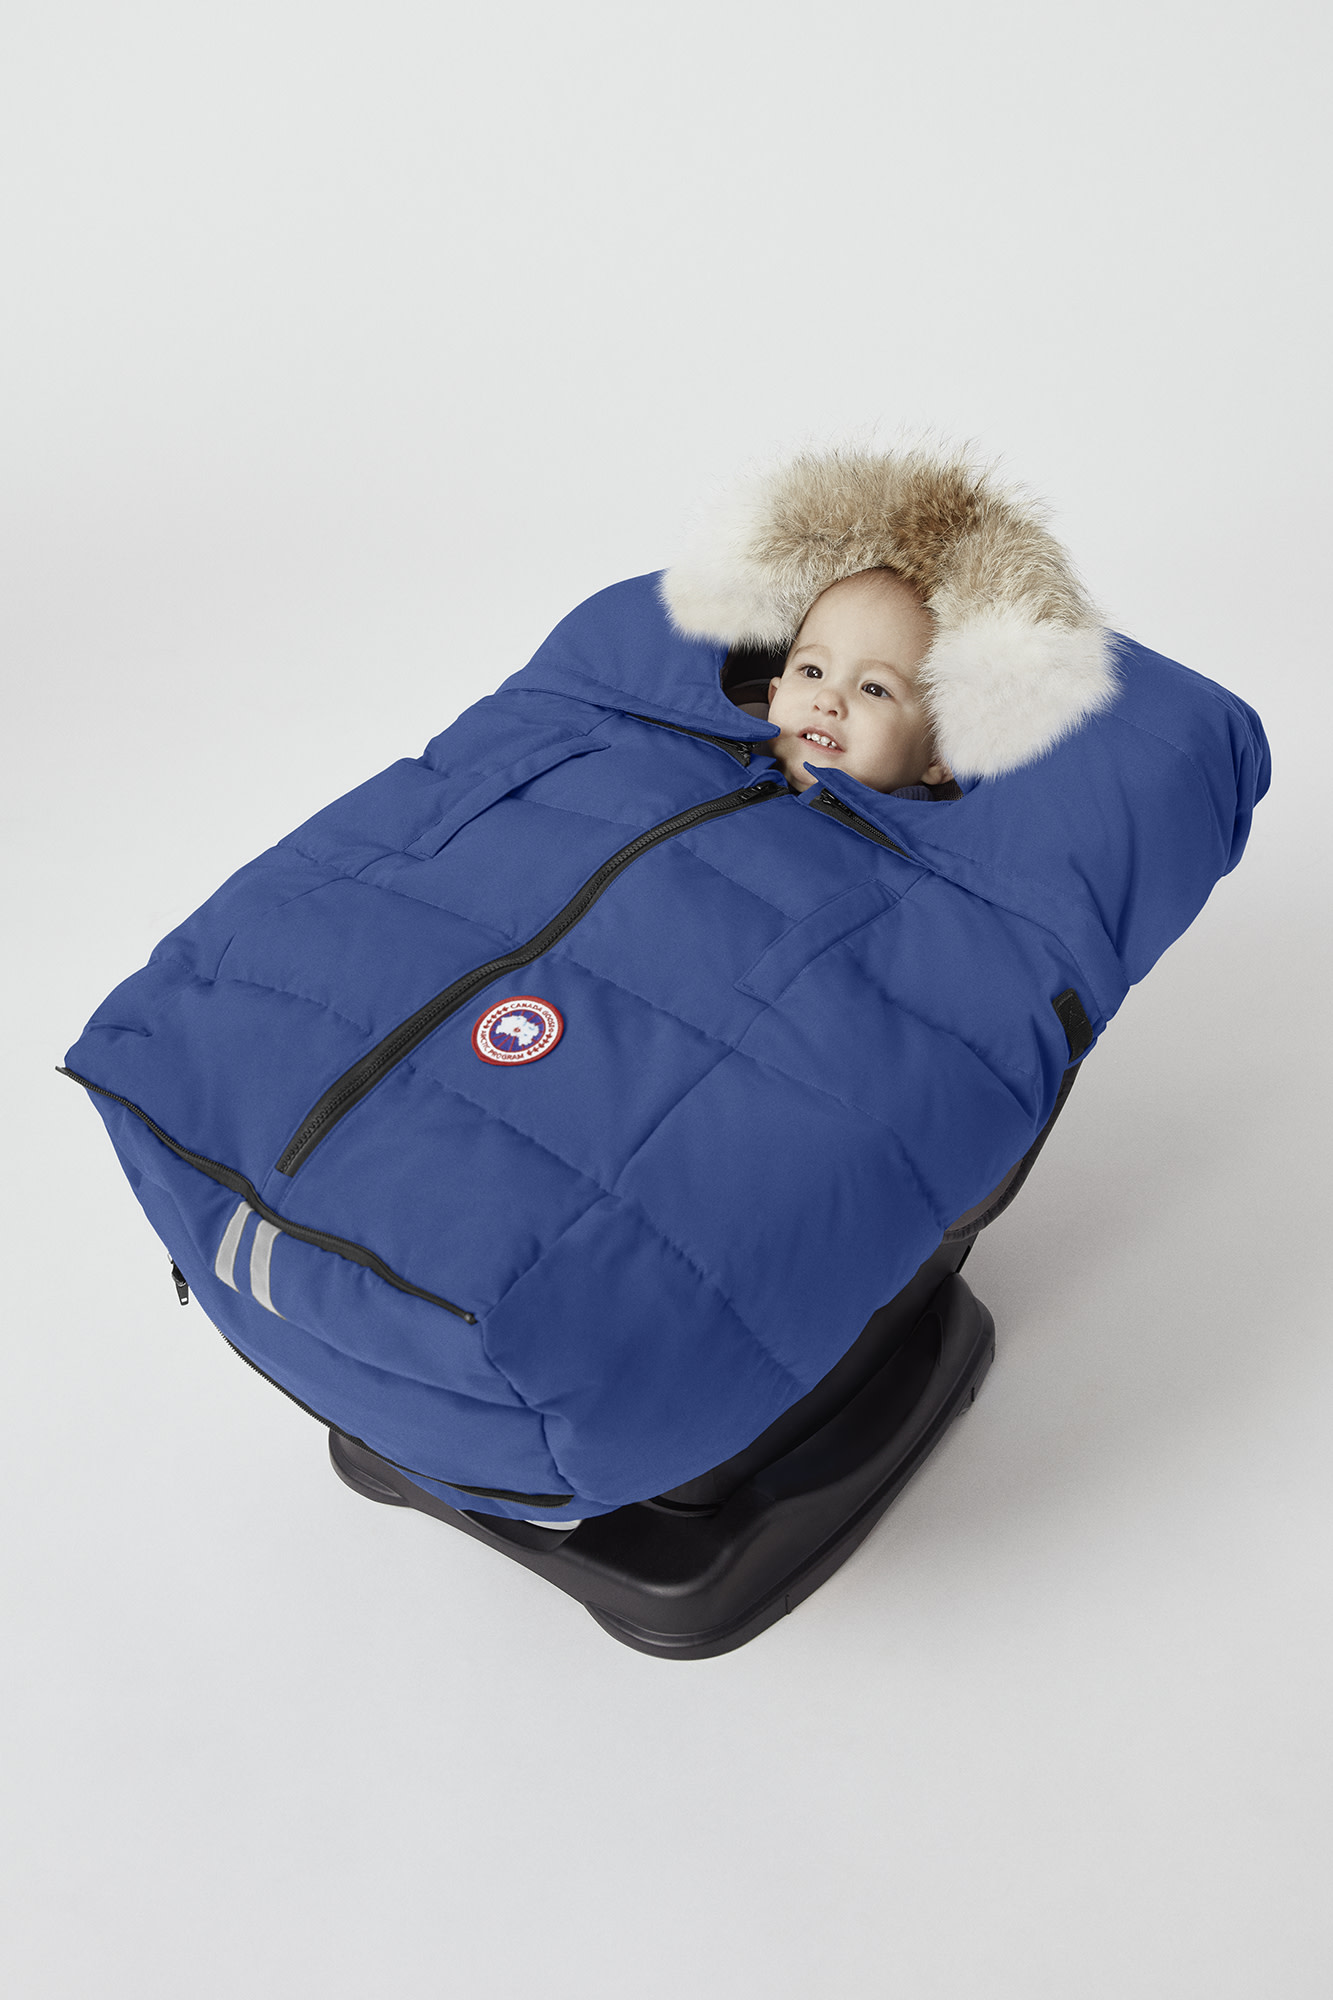 gyde Imperialisme væv Baby Fawn Bunting | Canada Goose®